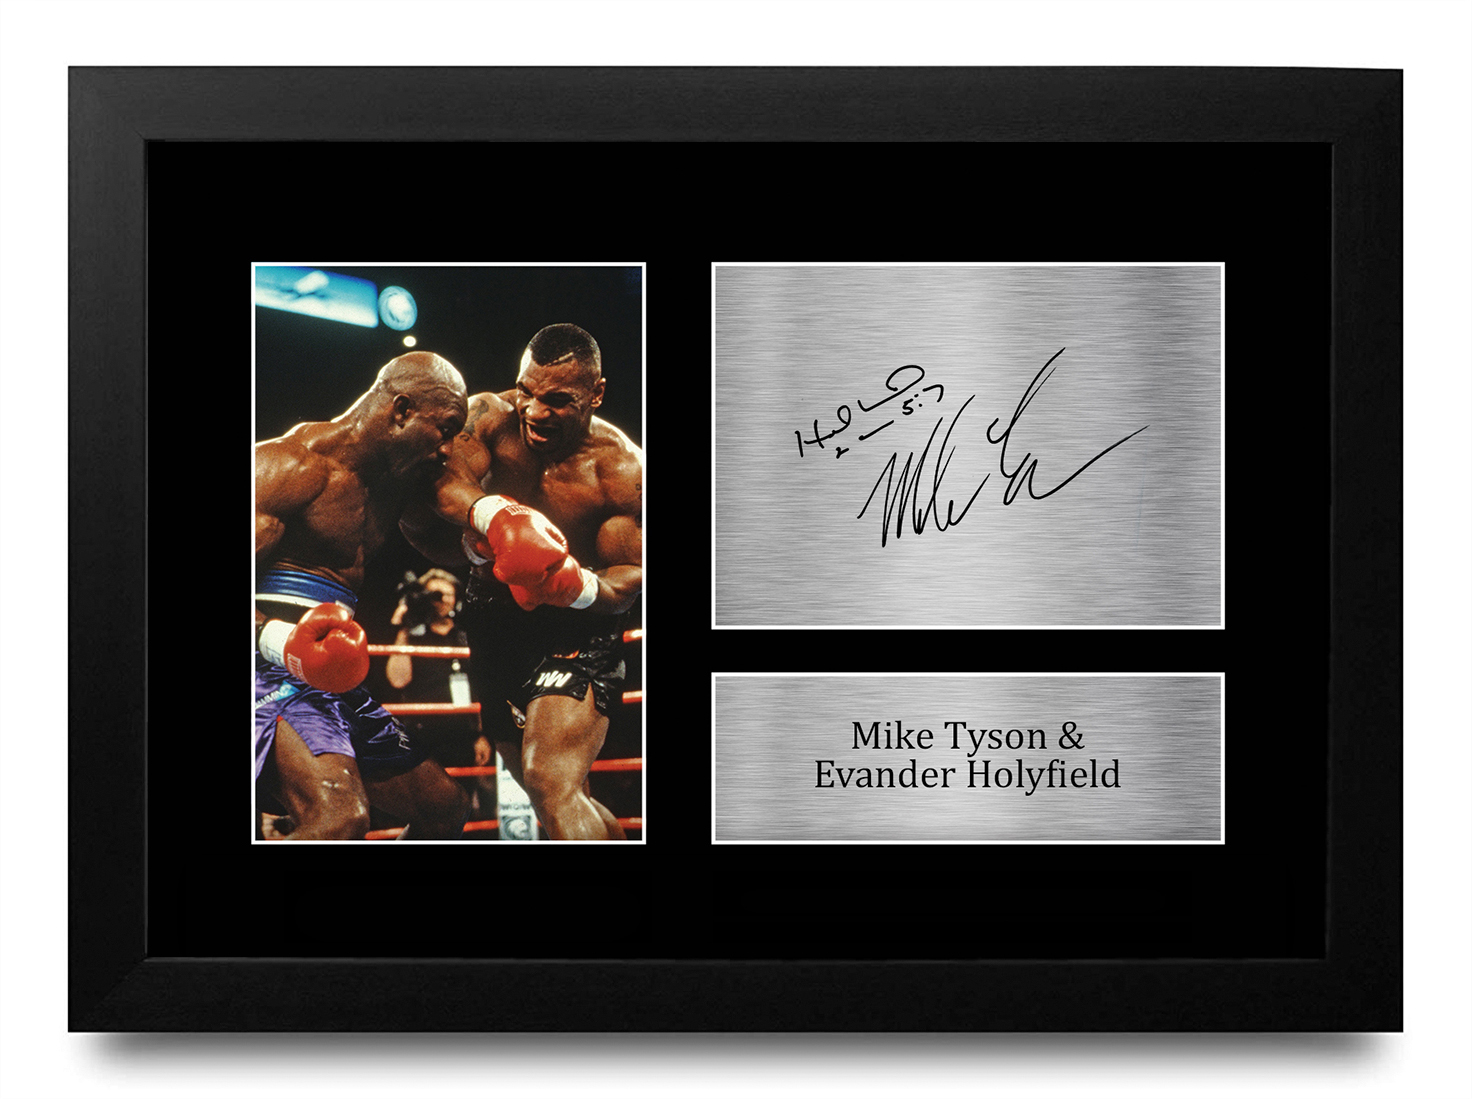 EVANDER HOLYFIELD VS MIKE TYSON II SIGNED POSTER PRINT PHOTO AUTOGRAPH GIFT 